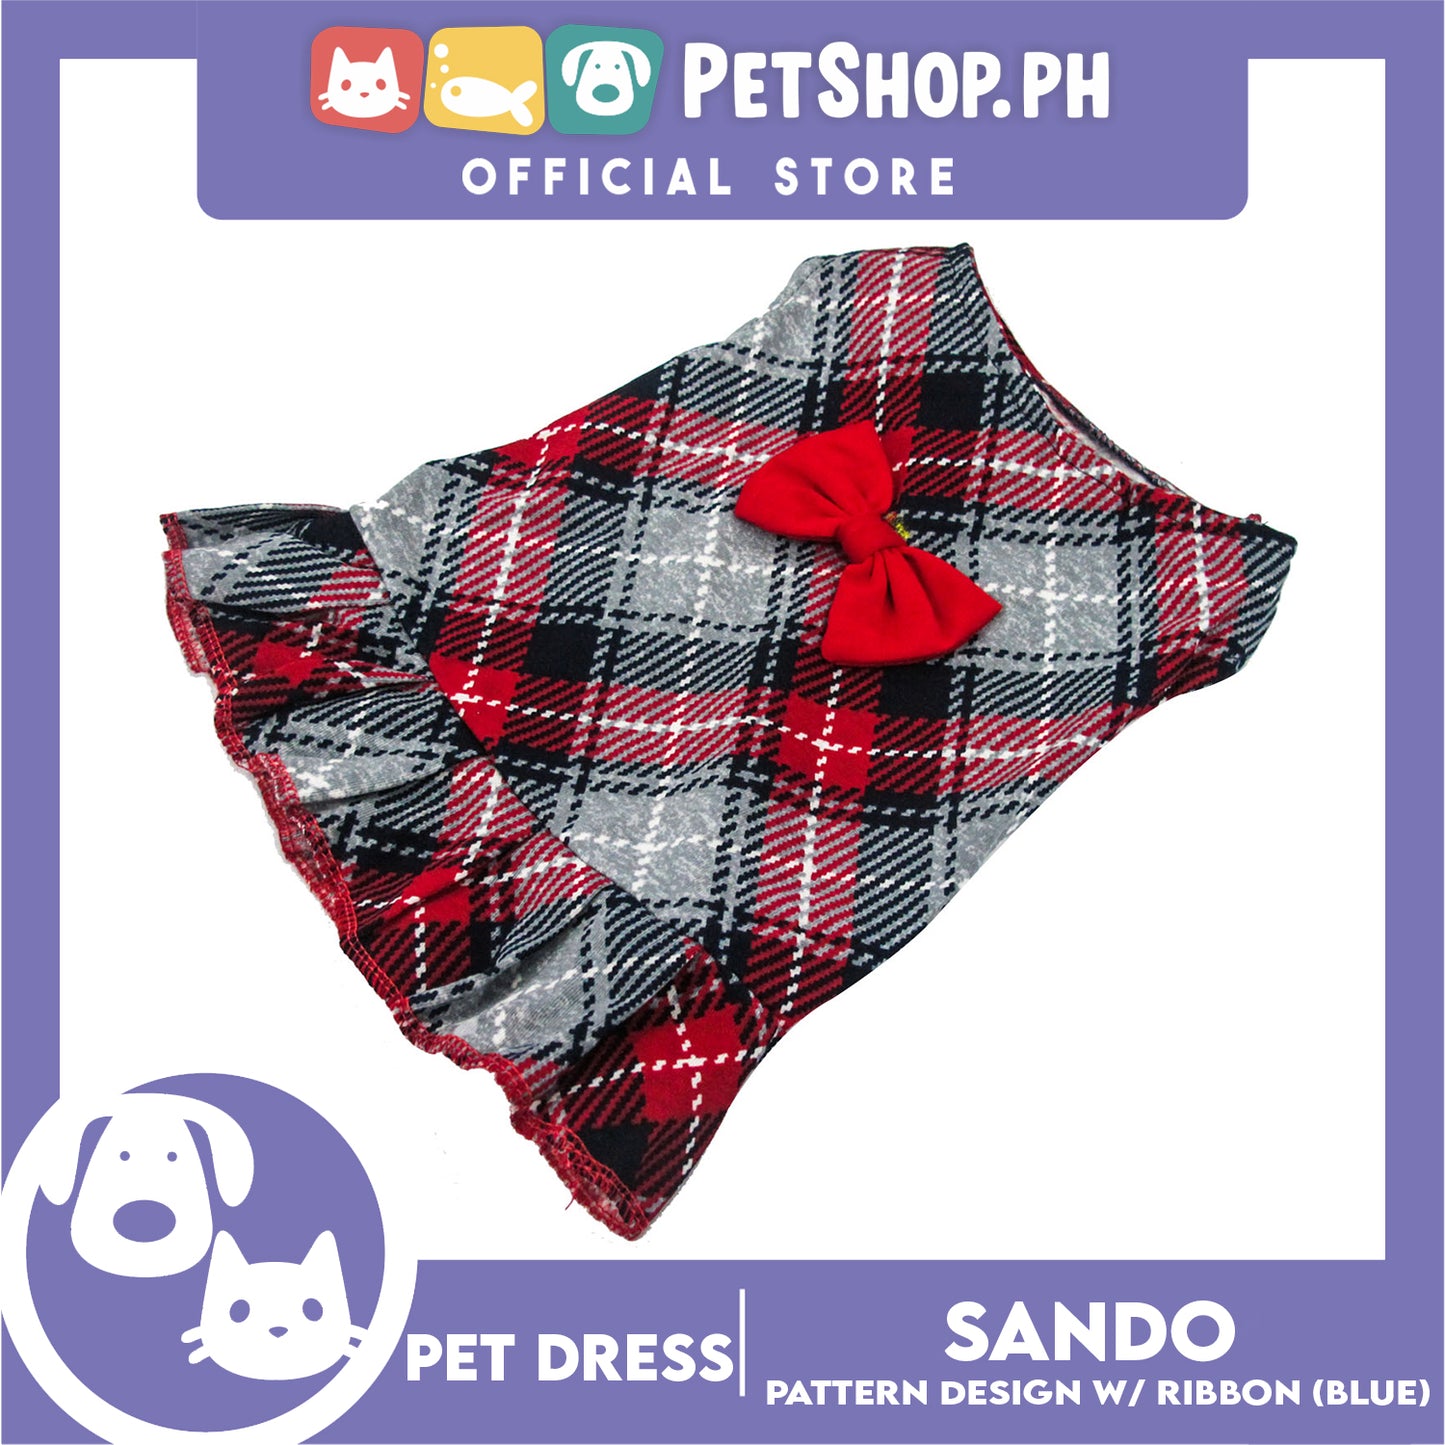 Pet Dress Summer Blue Checkered Skirt with Red Ribbon for Small Dog and Cat